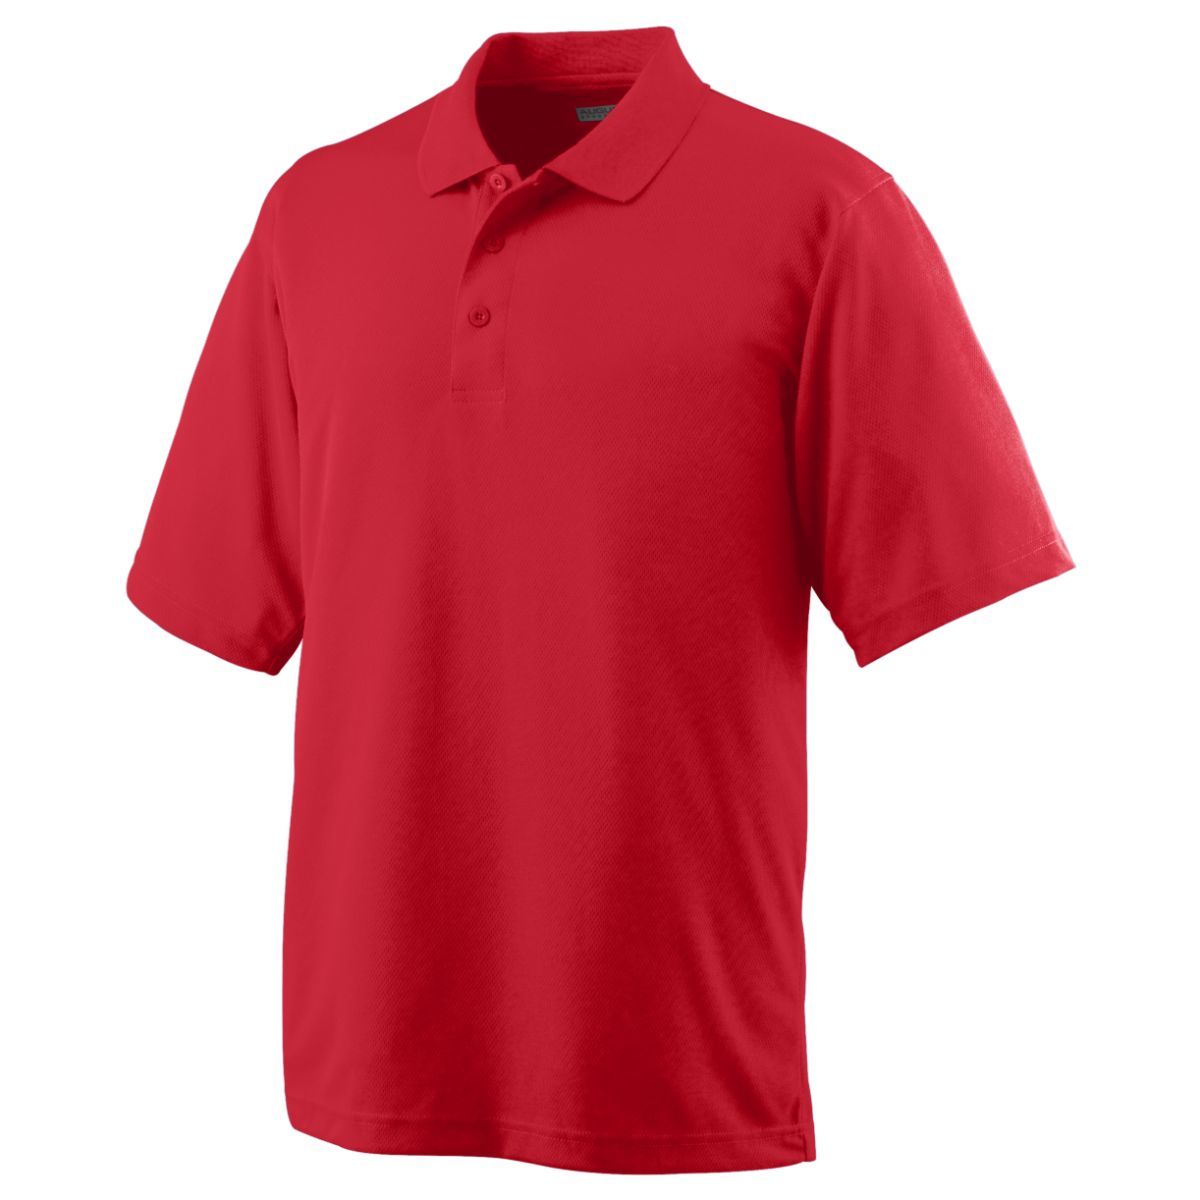 Augusta Sportswear Wicking Mesh Polo in Red  -Part of the Adult, Adult-Polos, Polos, Augusta-Products, Tennis, Shirts product lines at KanaleyCreations.com